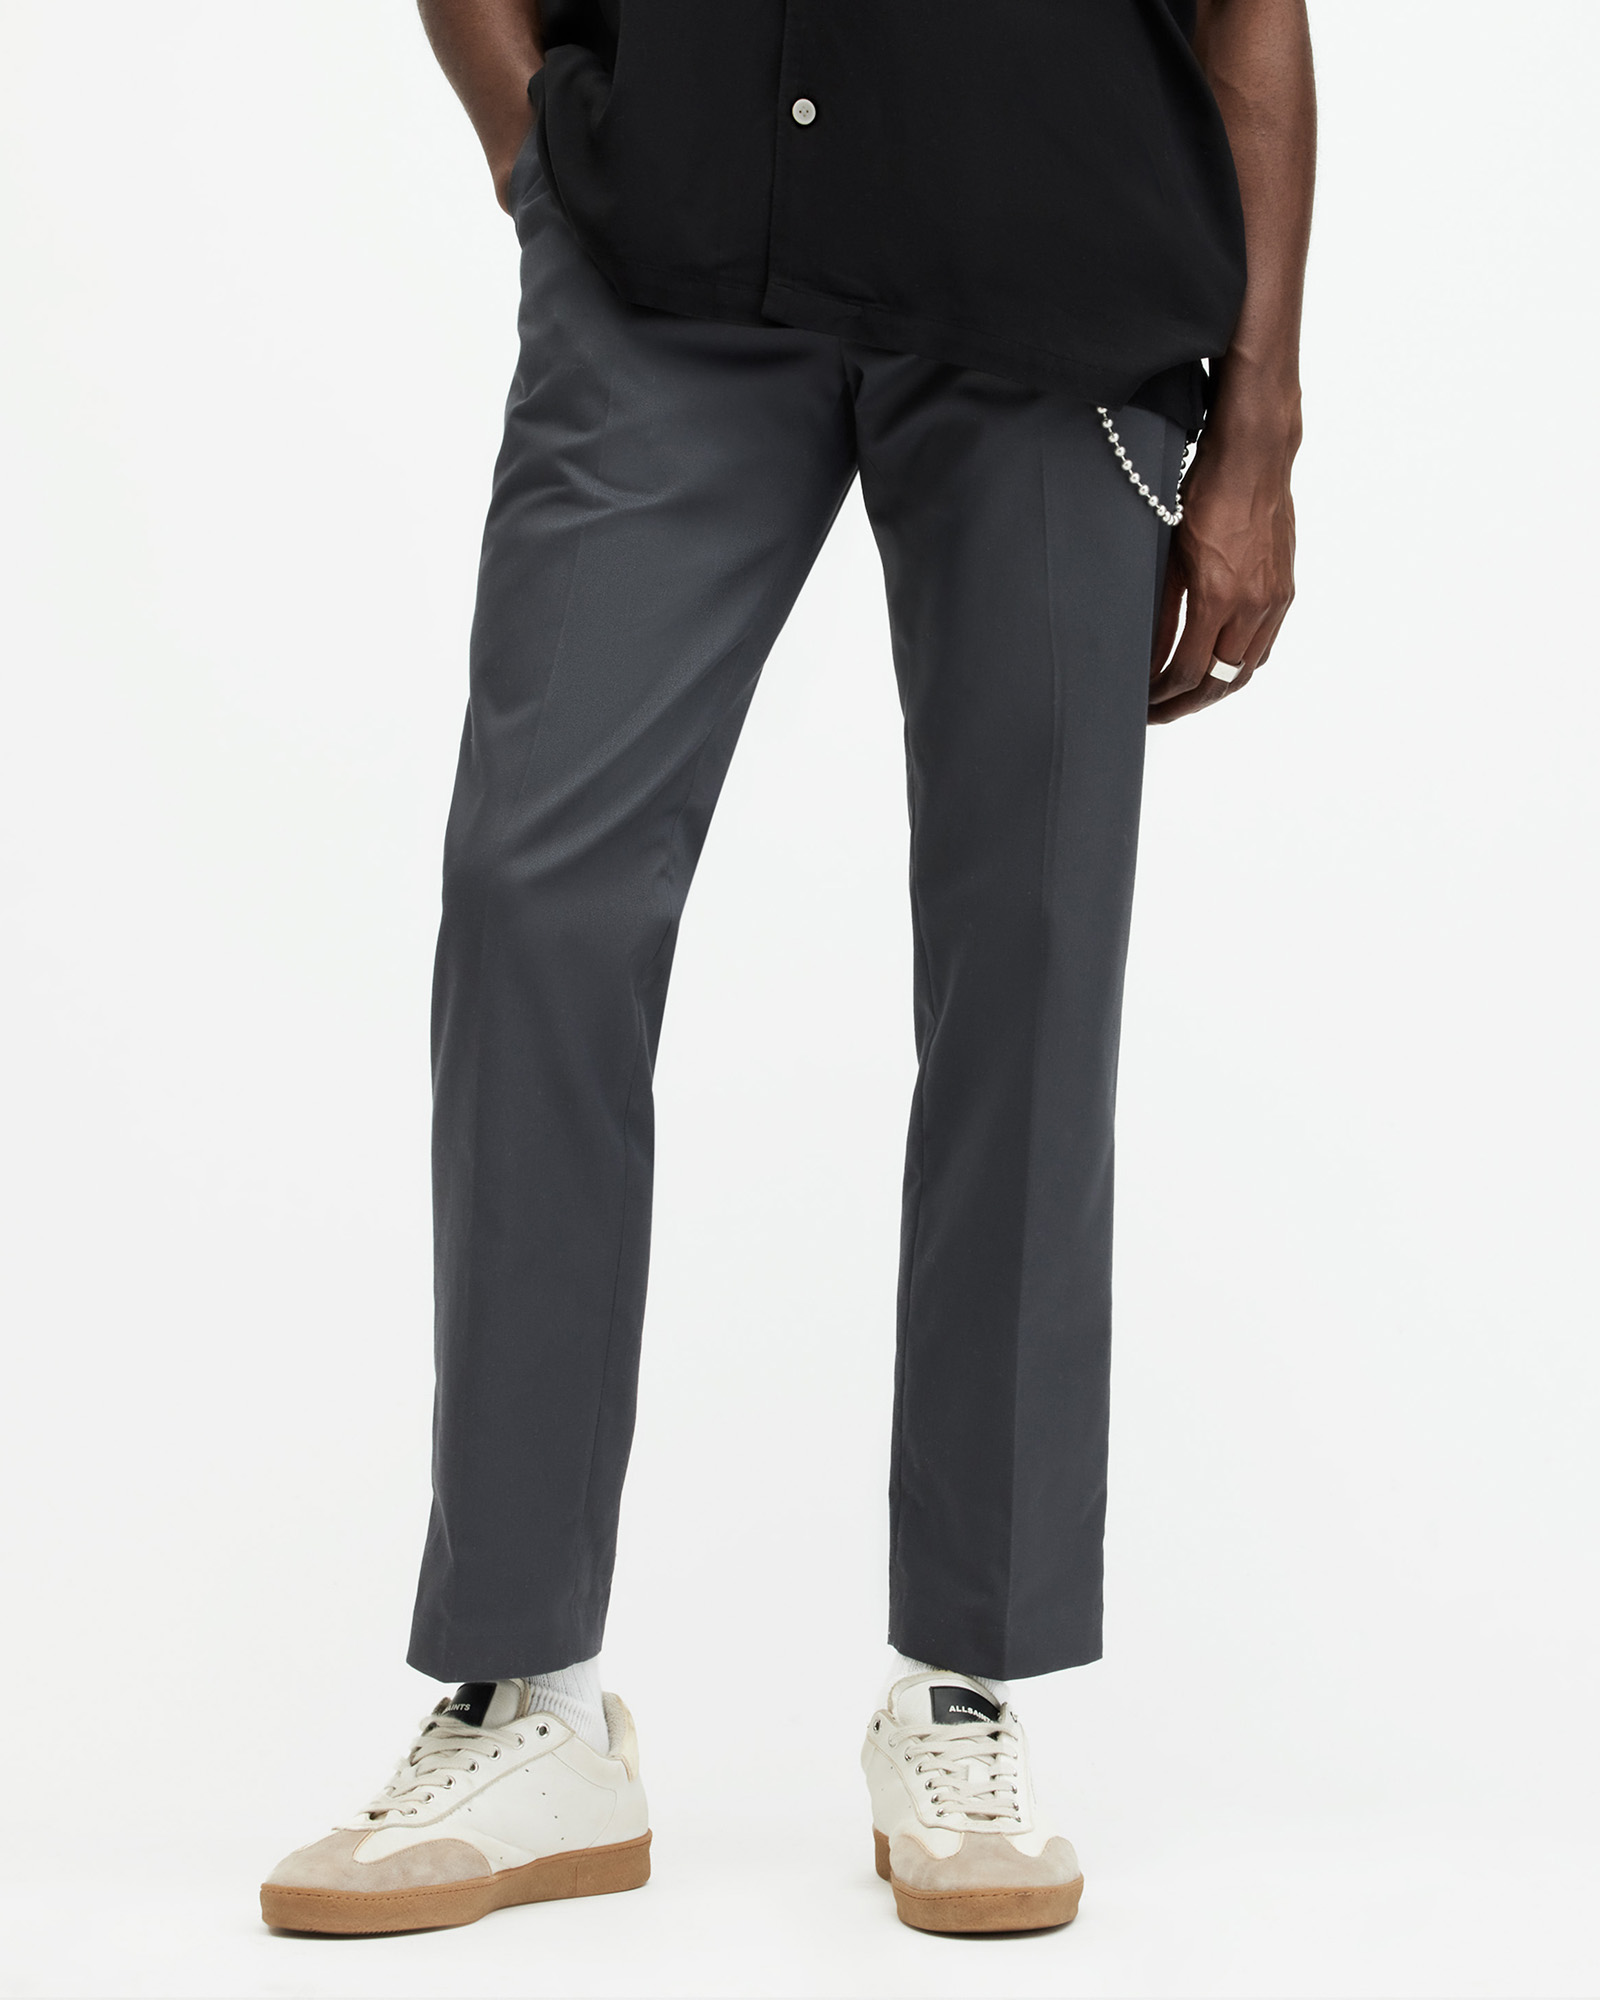 AllSaints Brite Straight Leg Relaxed Trousers,, Slate Grey